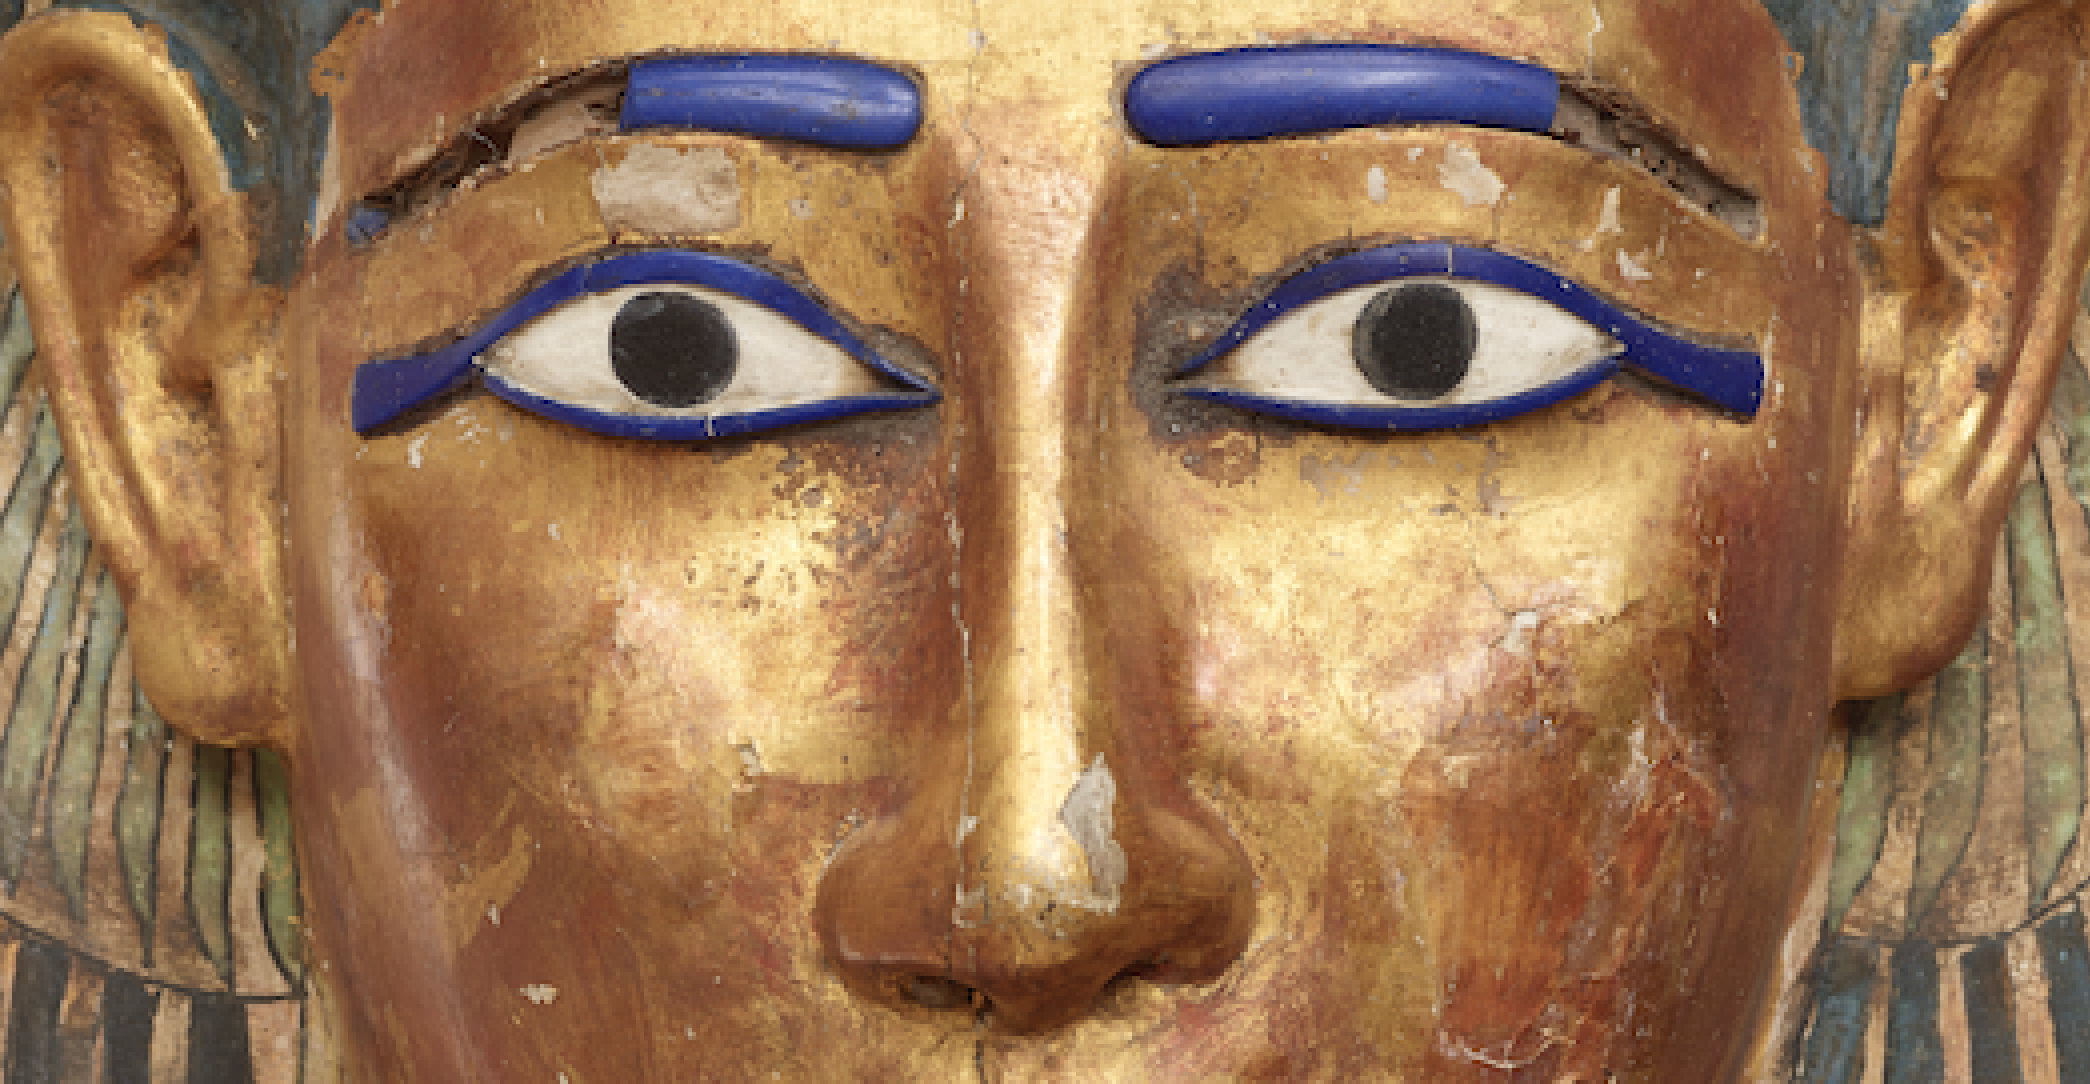 Close-up photo of Nesmin's gilded coffin, showing the face from the brows to the nose. The eyes are open and the eyebrows are a vivid inlaid blue.